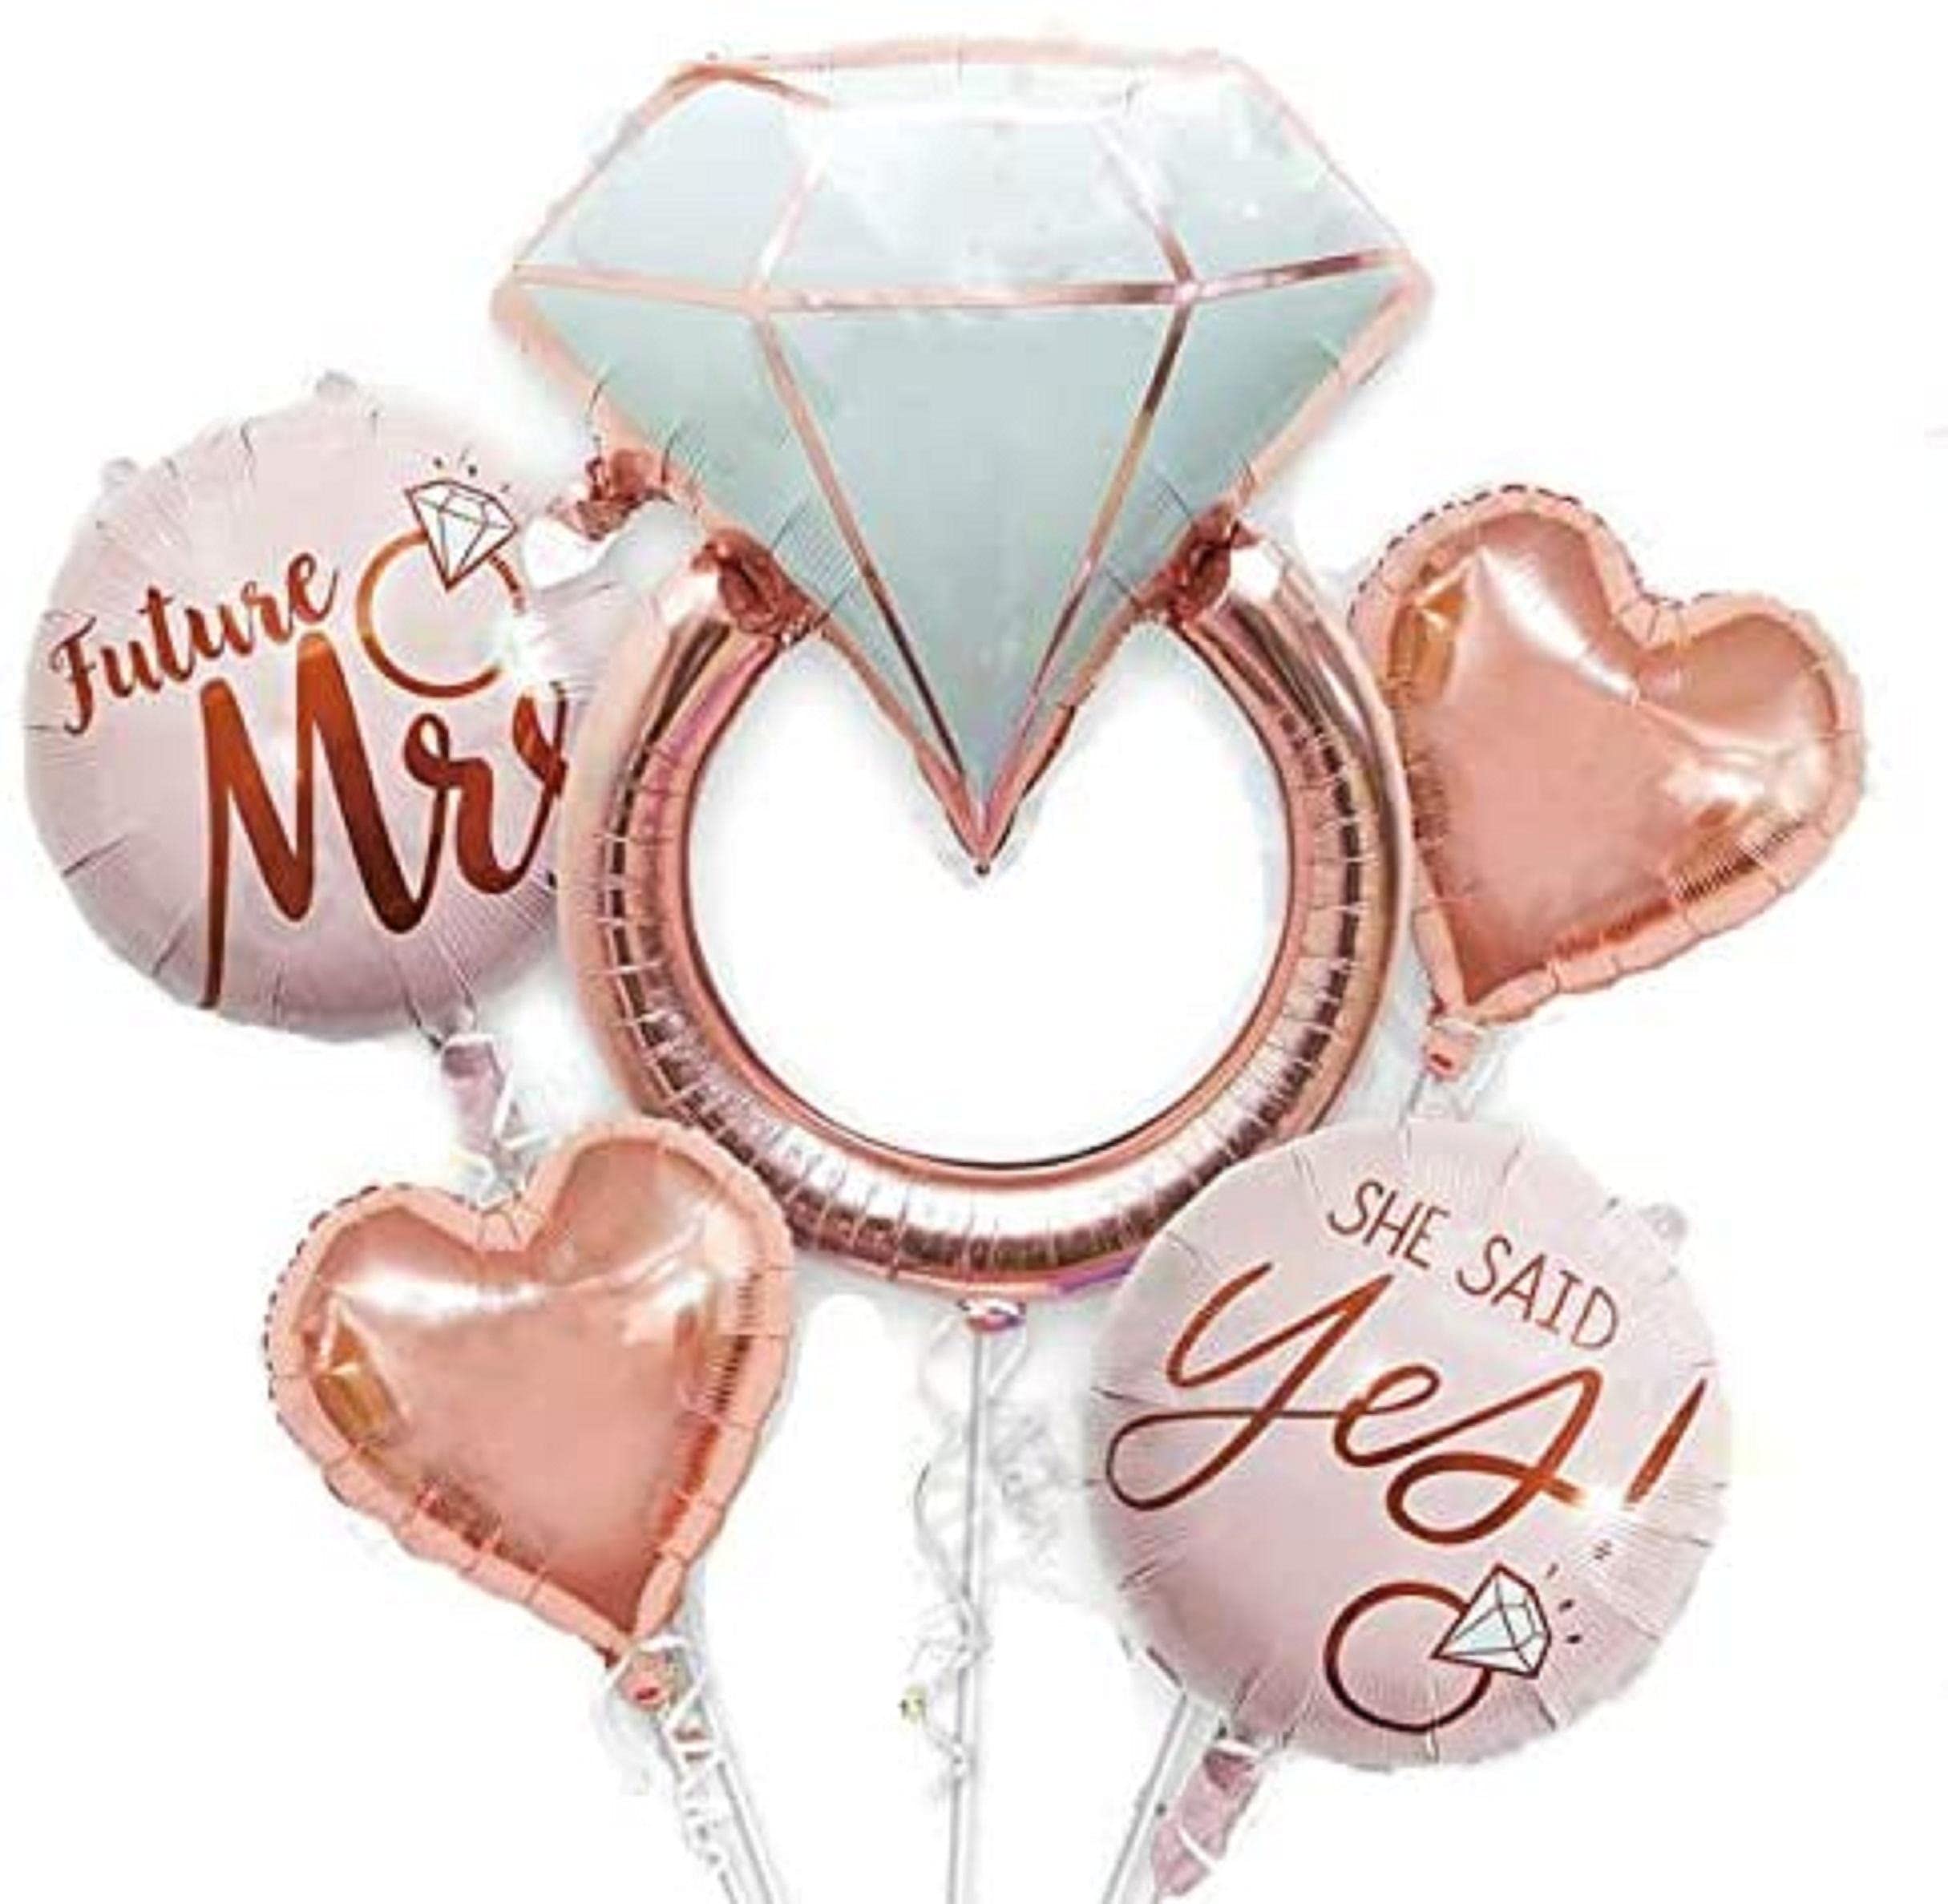 she-said-yes-&-future-mrs-&-diamond-ring--foil-balloons-rose-gold--5-piece-set-